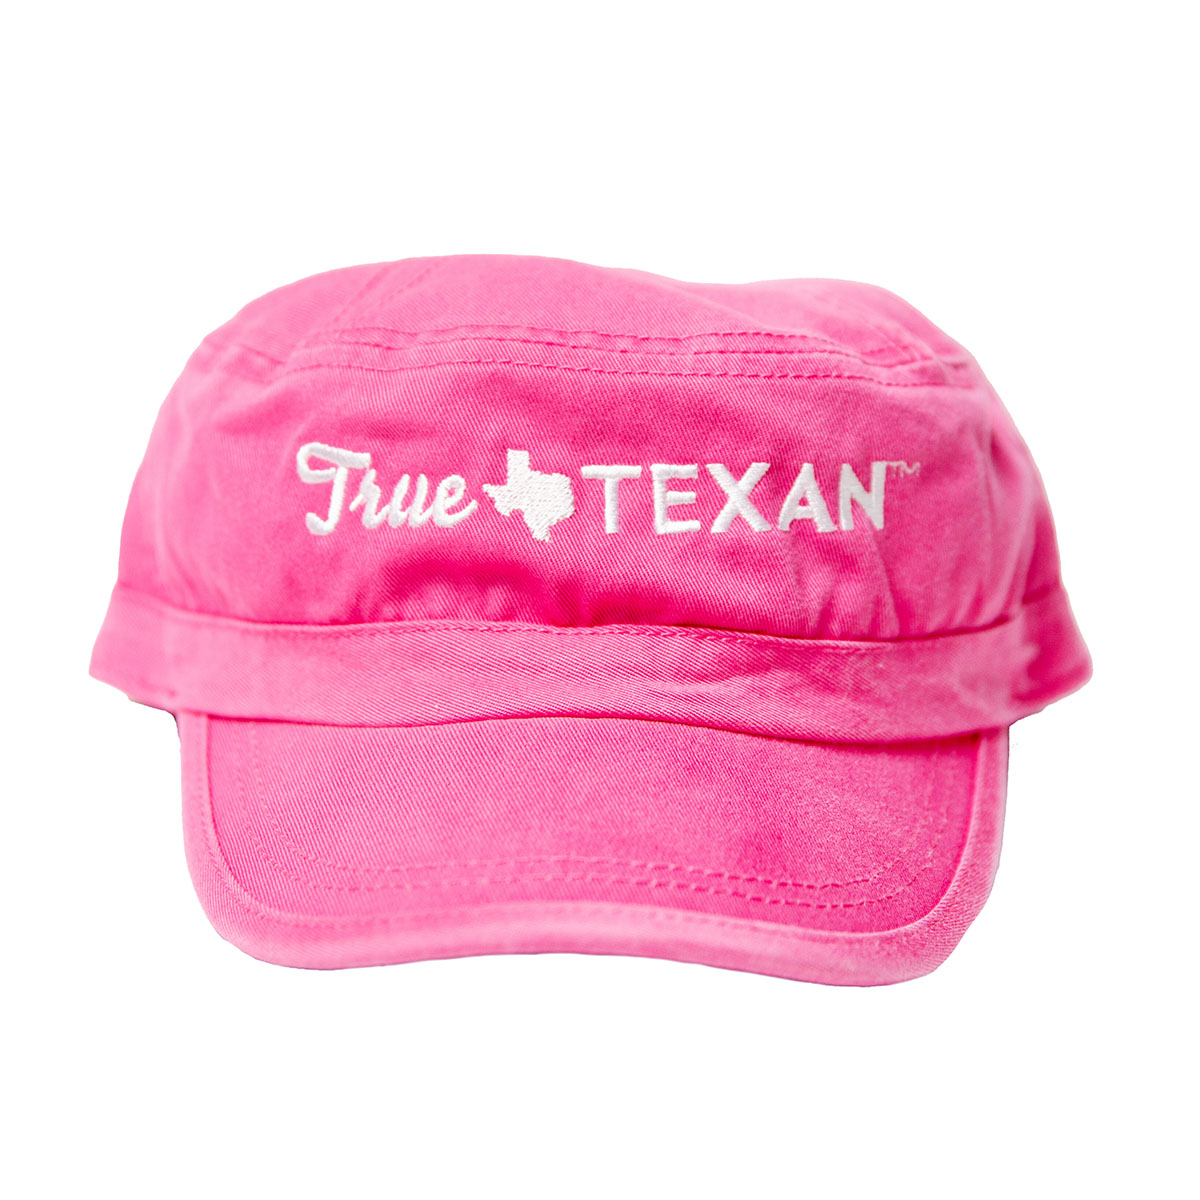 Limited Edition True Texan Patrol Cap in Hot Pink